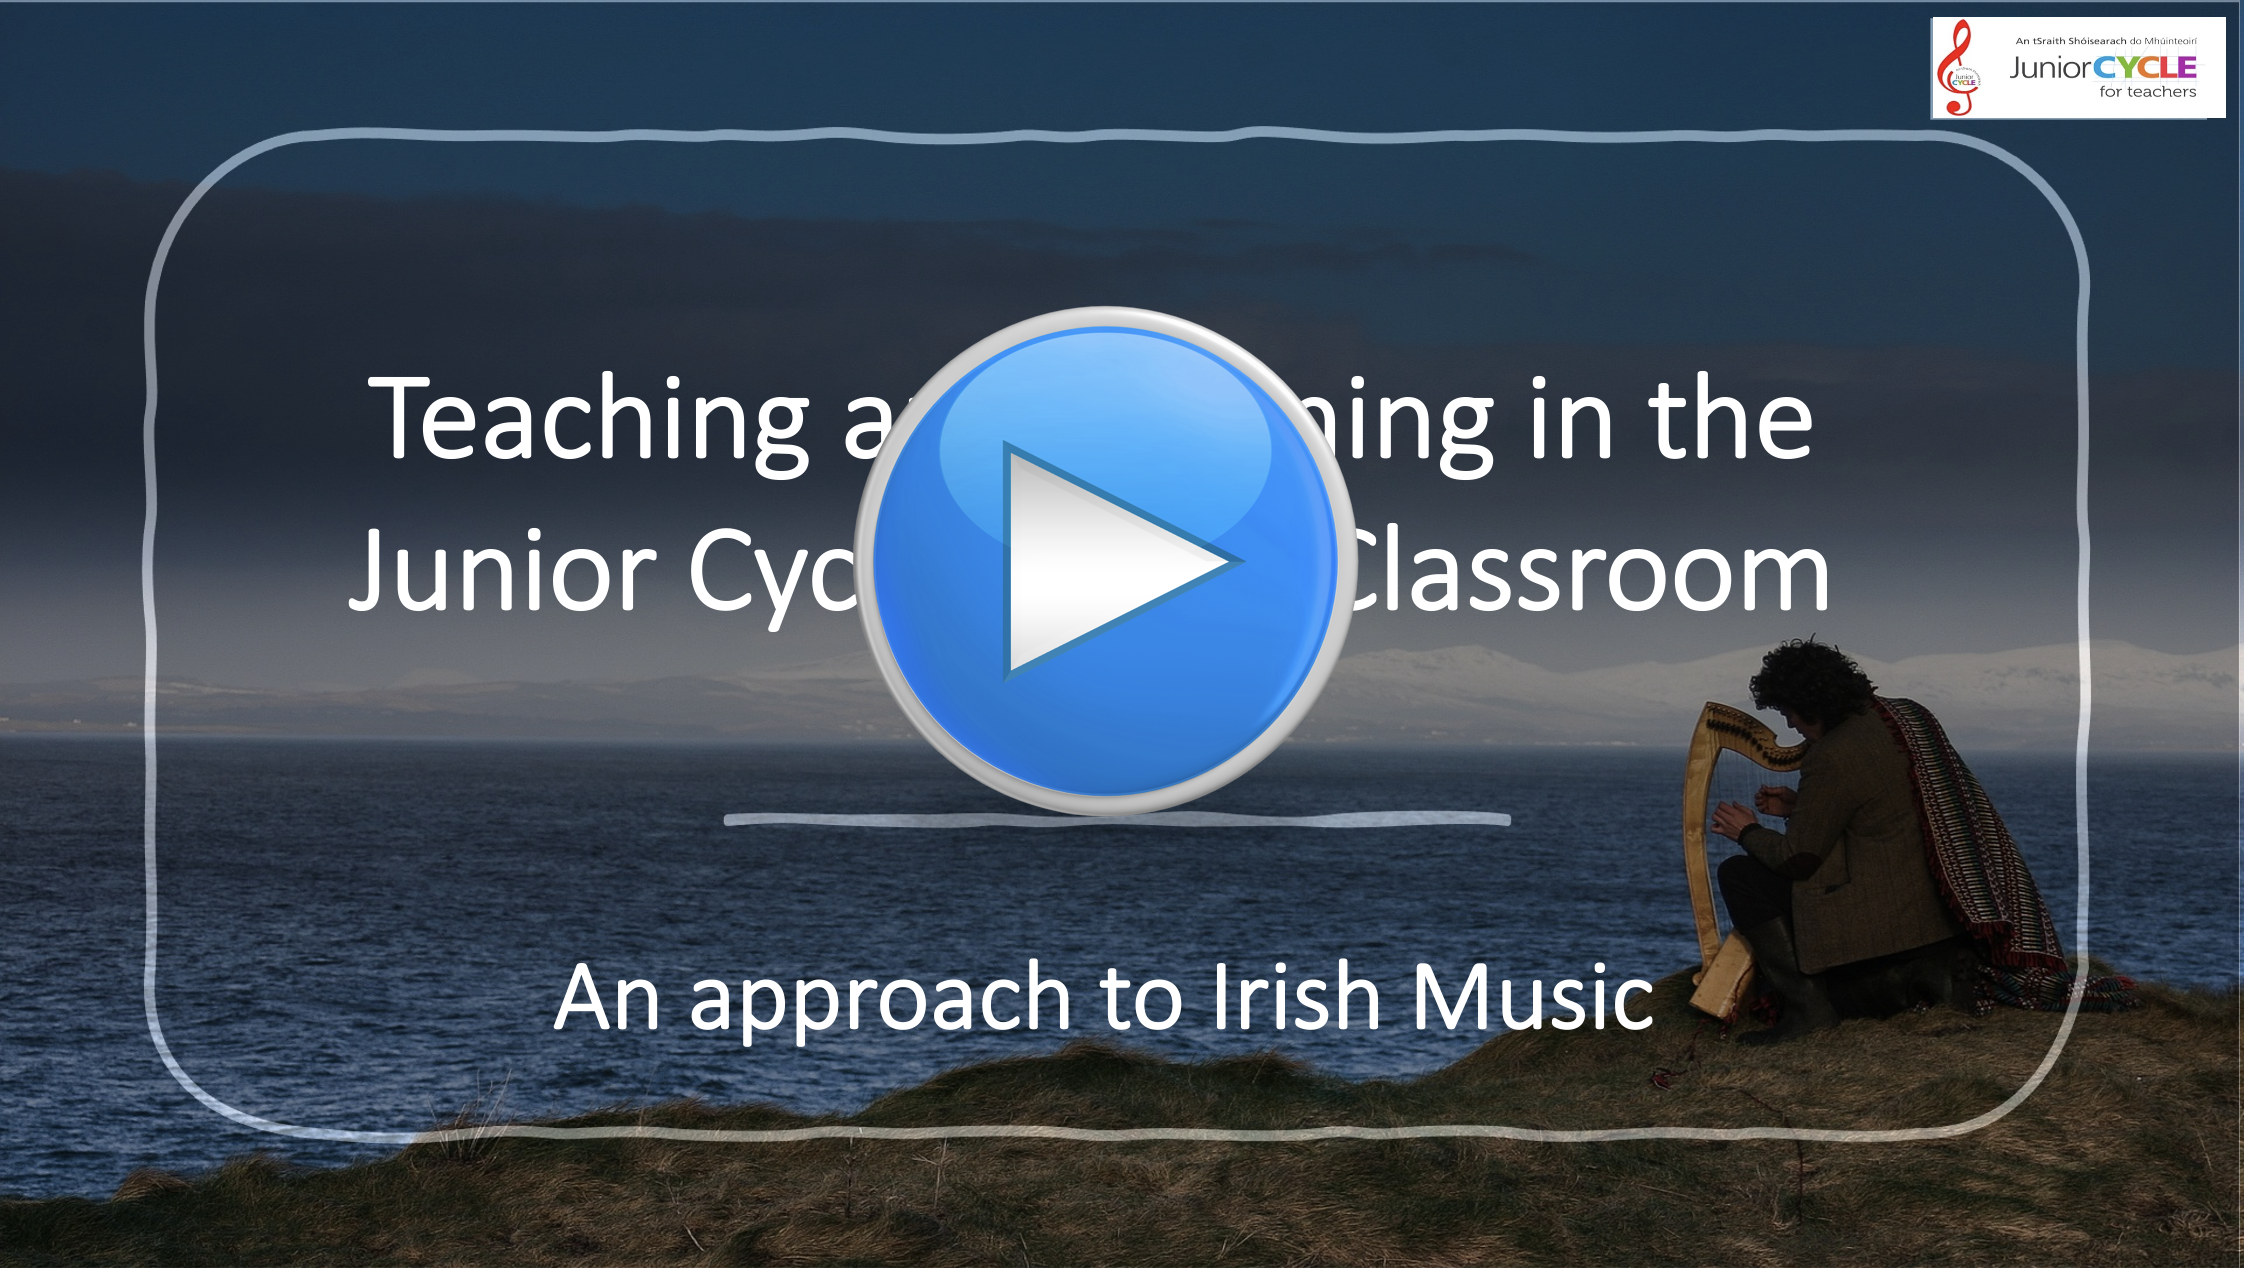 Online Learning - An Approach to Irish Music